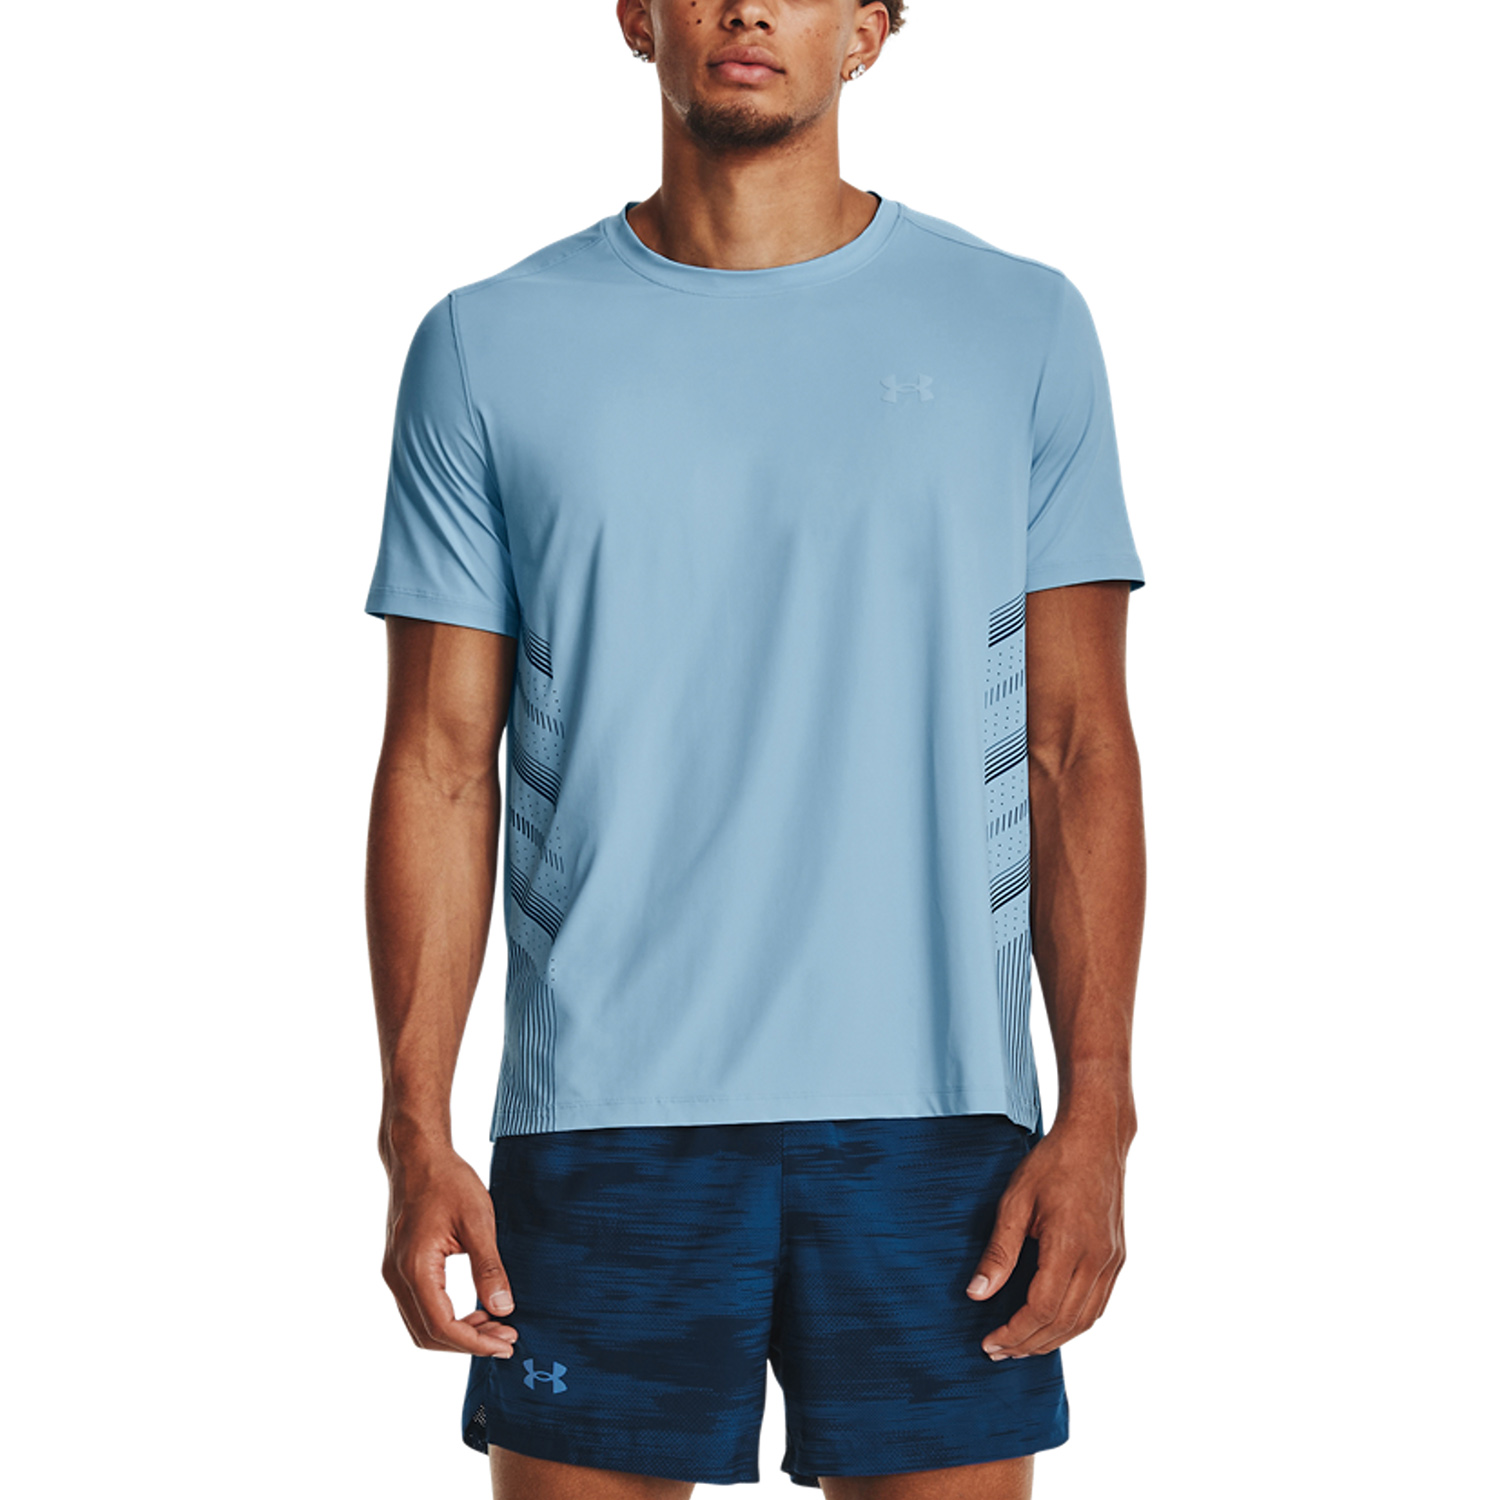 Men's UA Iso-Chill Compression Short Sleeve